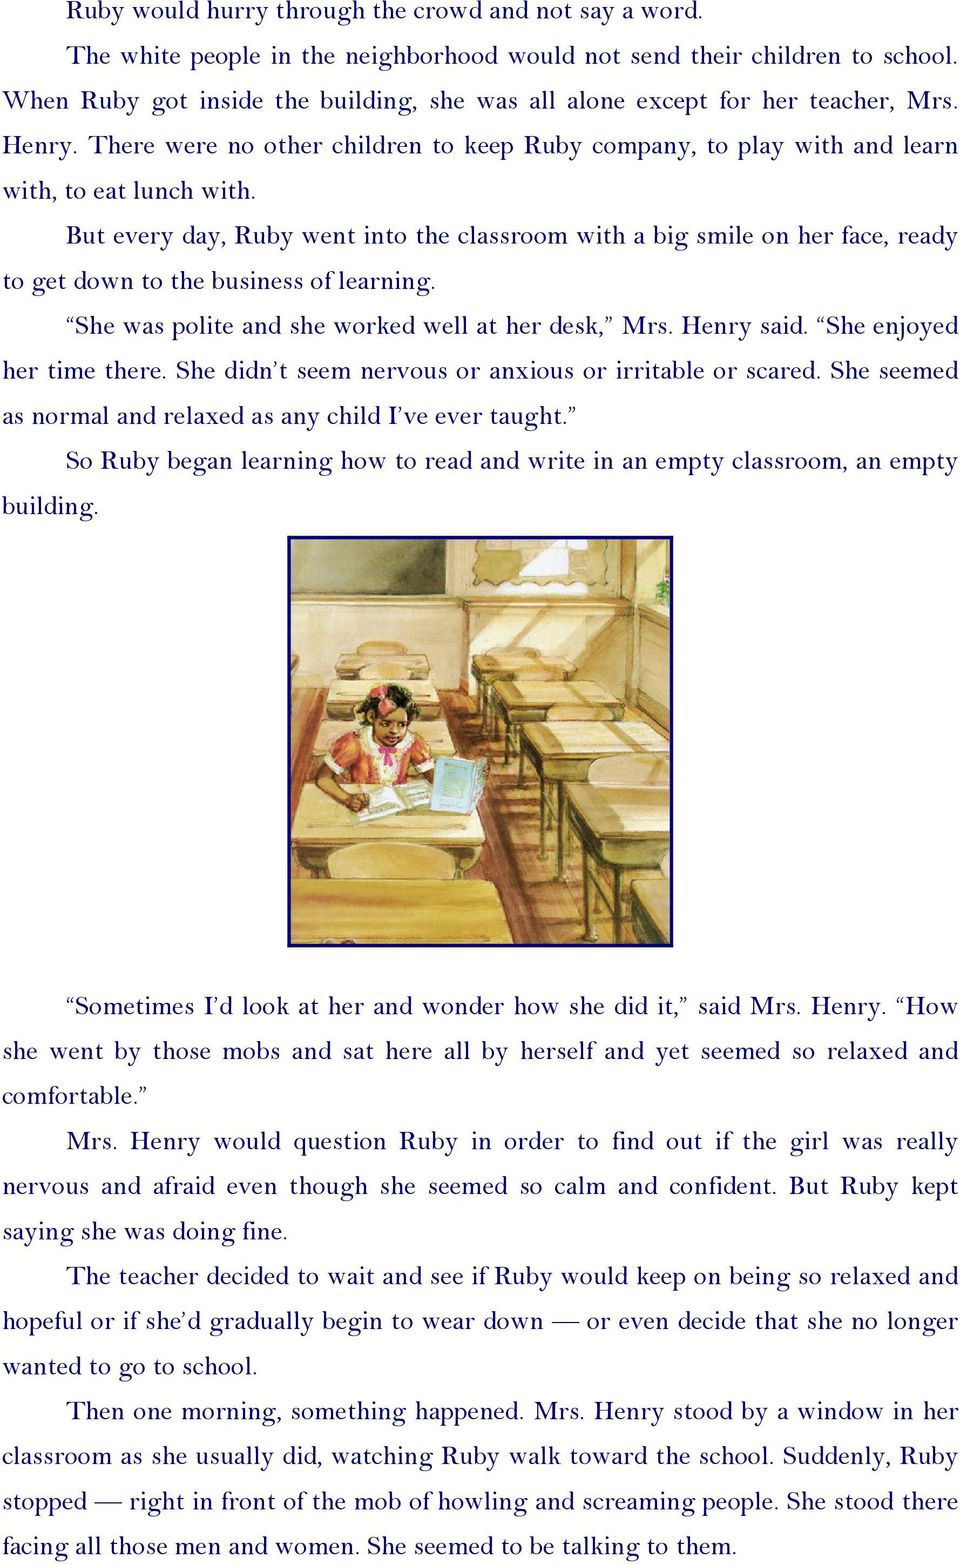 But every day, Ruby went into the classroom with a big smile on her face, ready to get down to the business of learning. She was polite and she worked well at her desk, Mrs. Henry said.